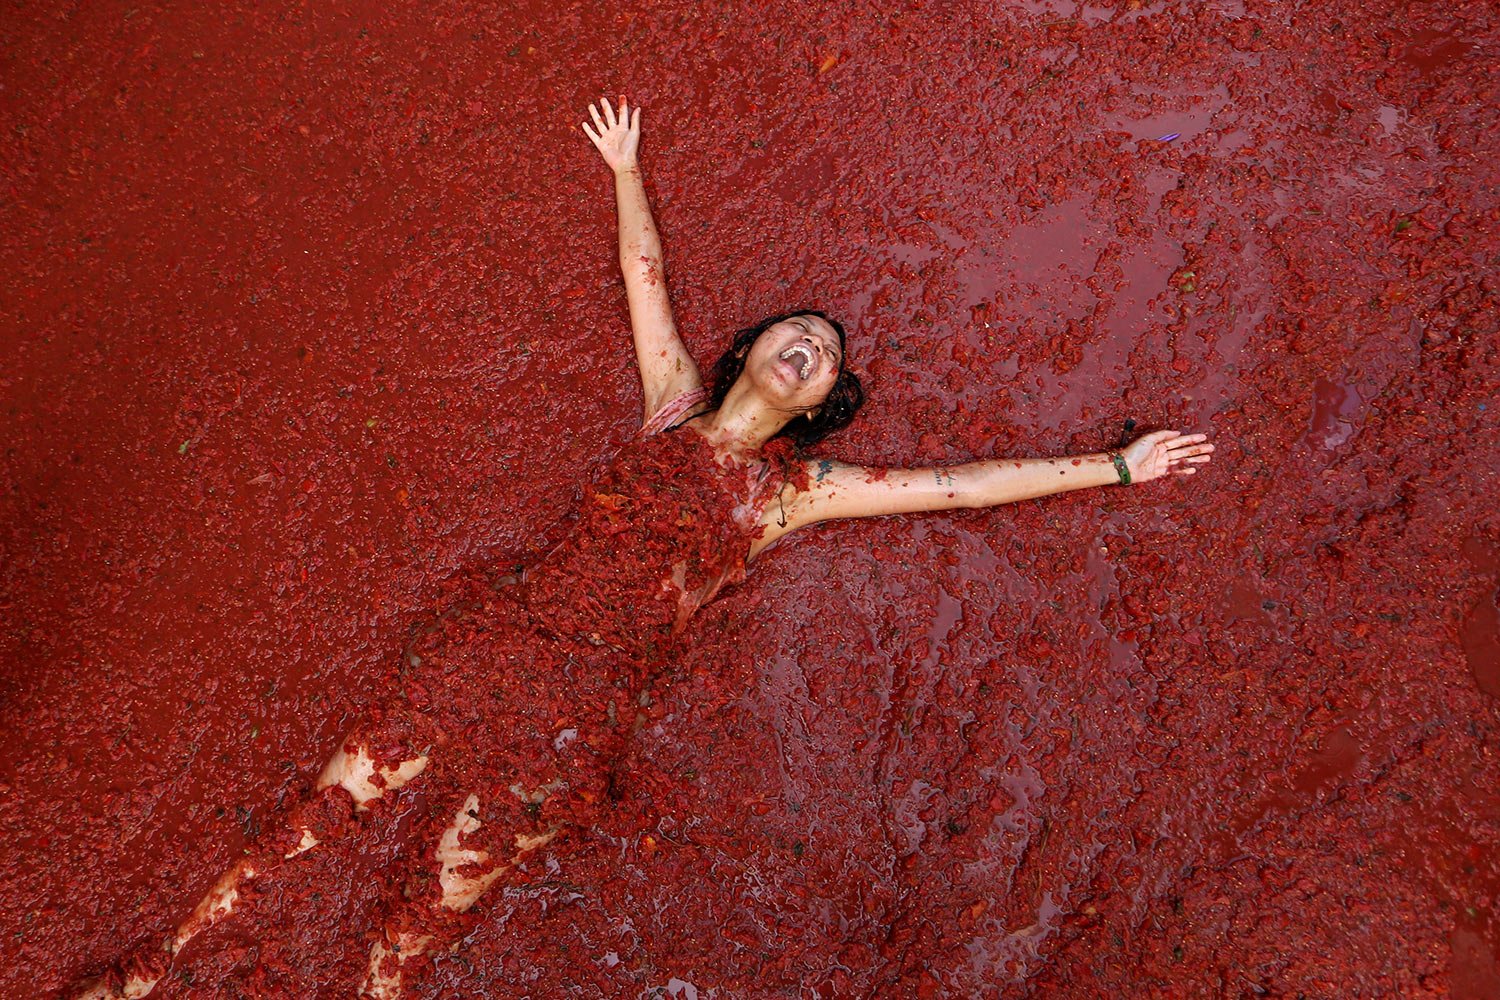  A woman reacts during the annual tomato fight fiesta called "Tomatina" in the village of Bunol near Valencia, Spain, Wednesday, Aug. 30, 2023. (AP Photo/Alberto Saiz) 